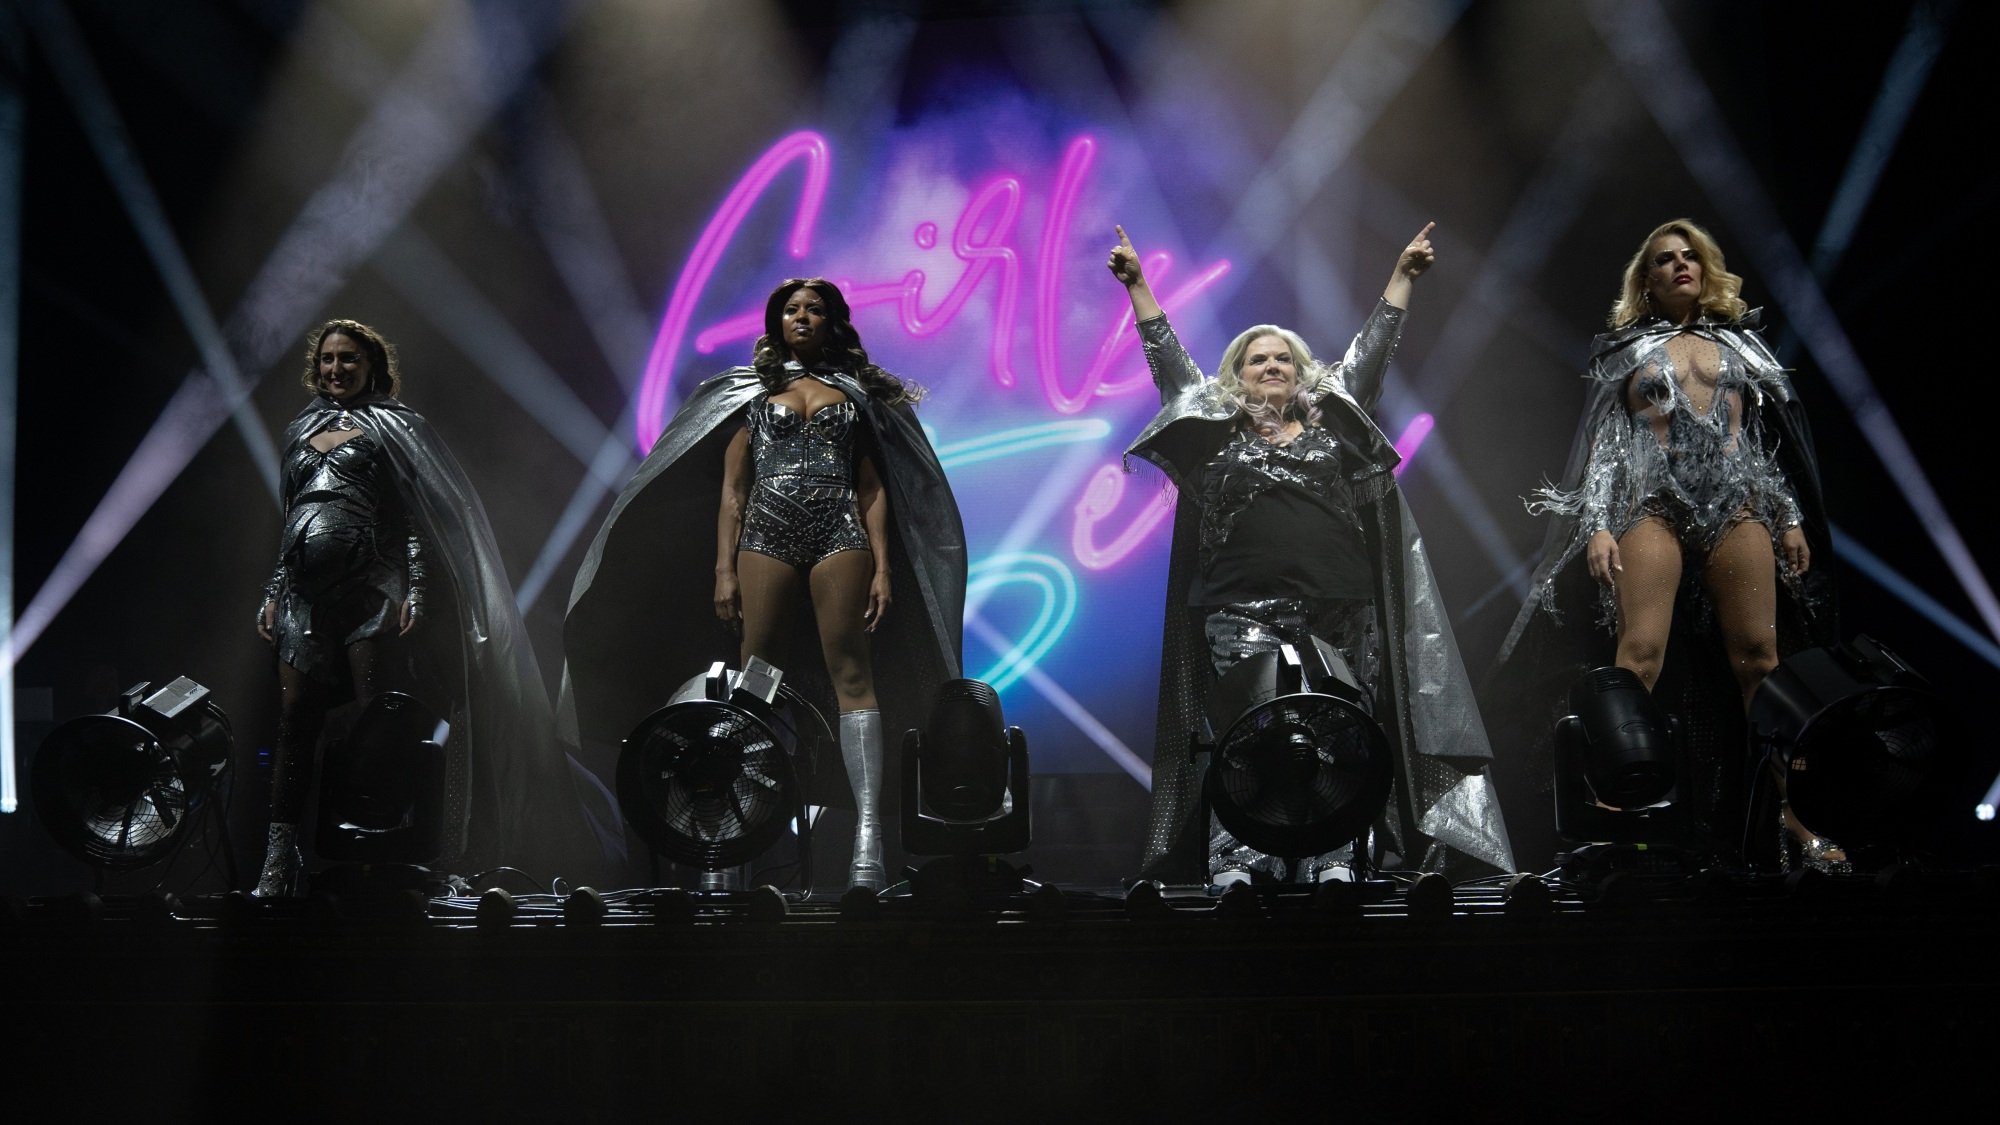 A band of four women stand onstage in elaborate silver outfits against a backdrop that says "Girls5eva."